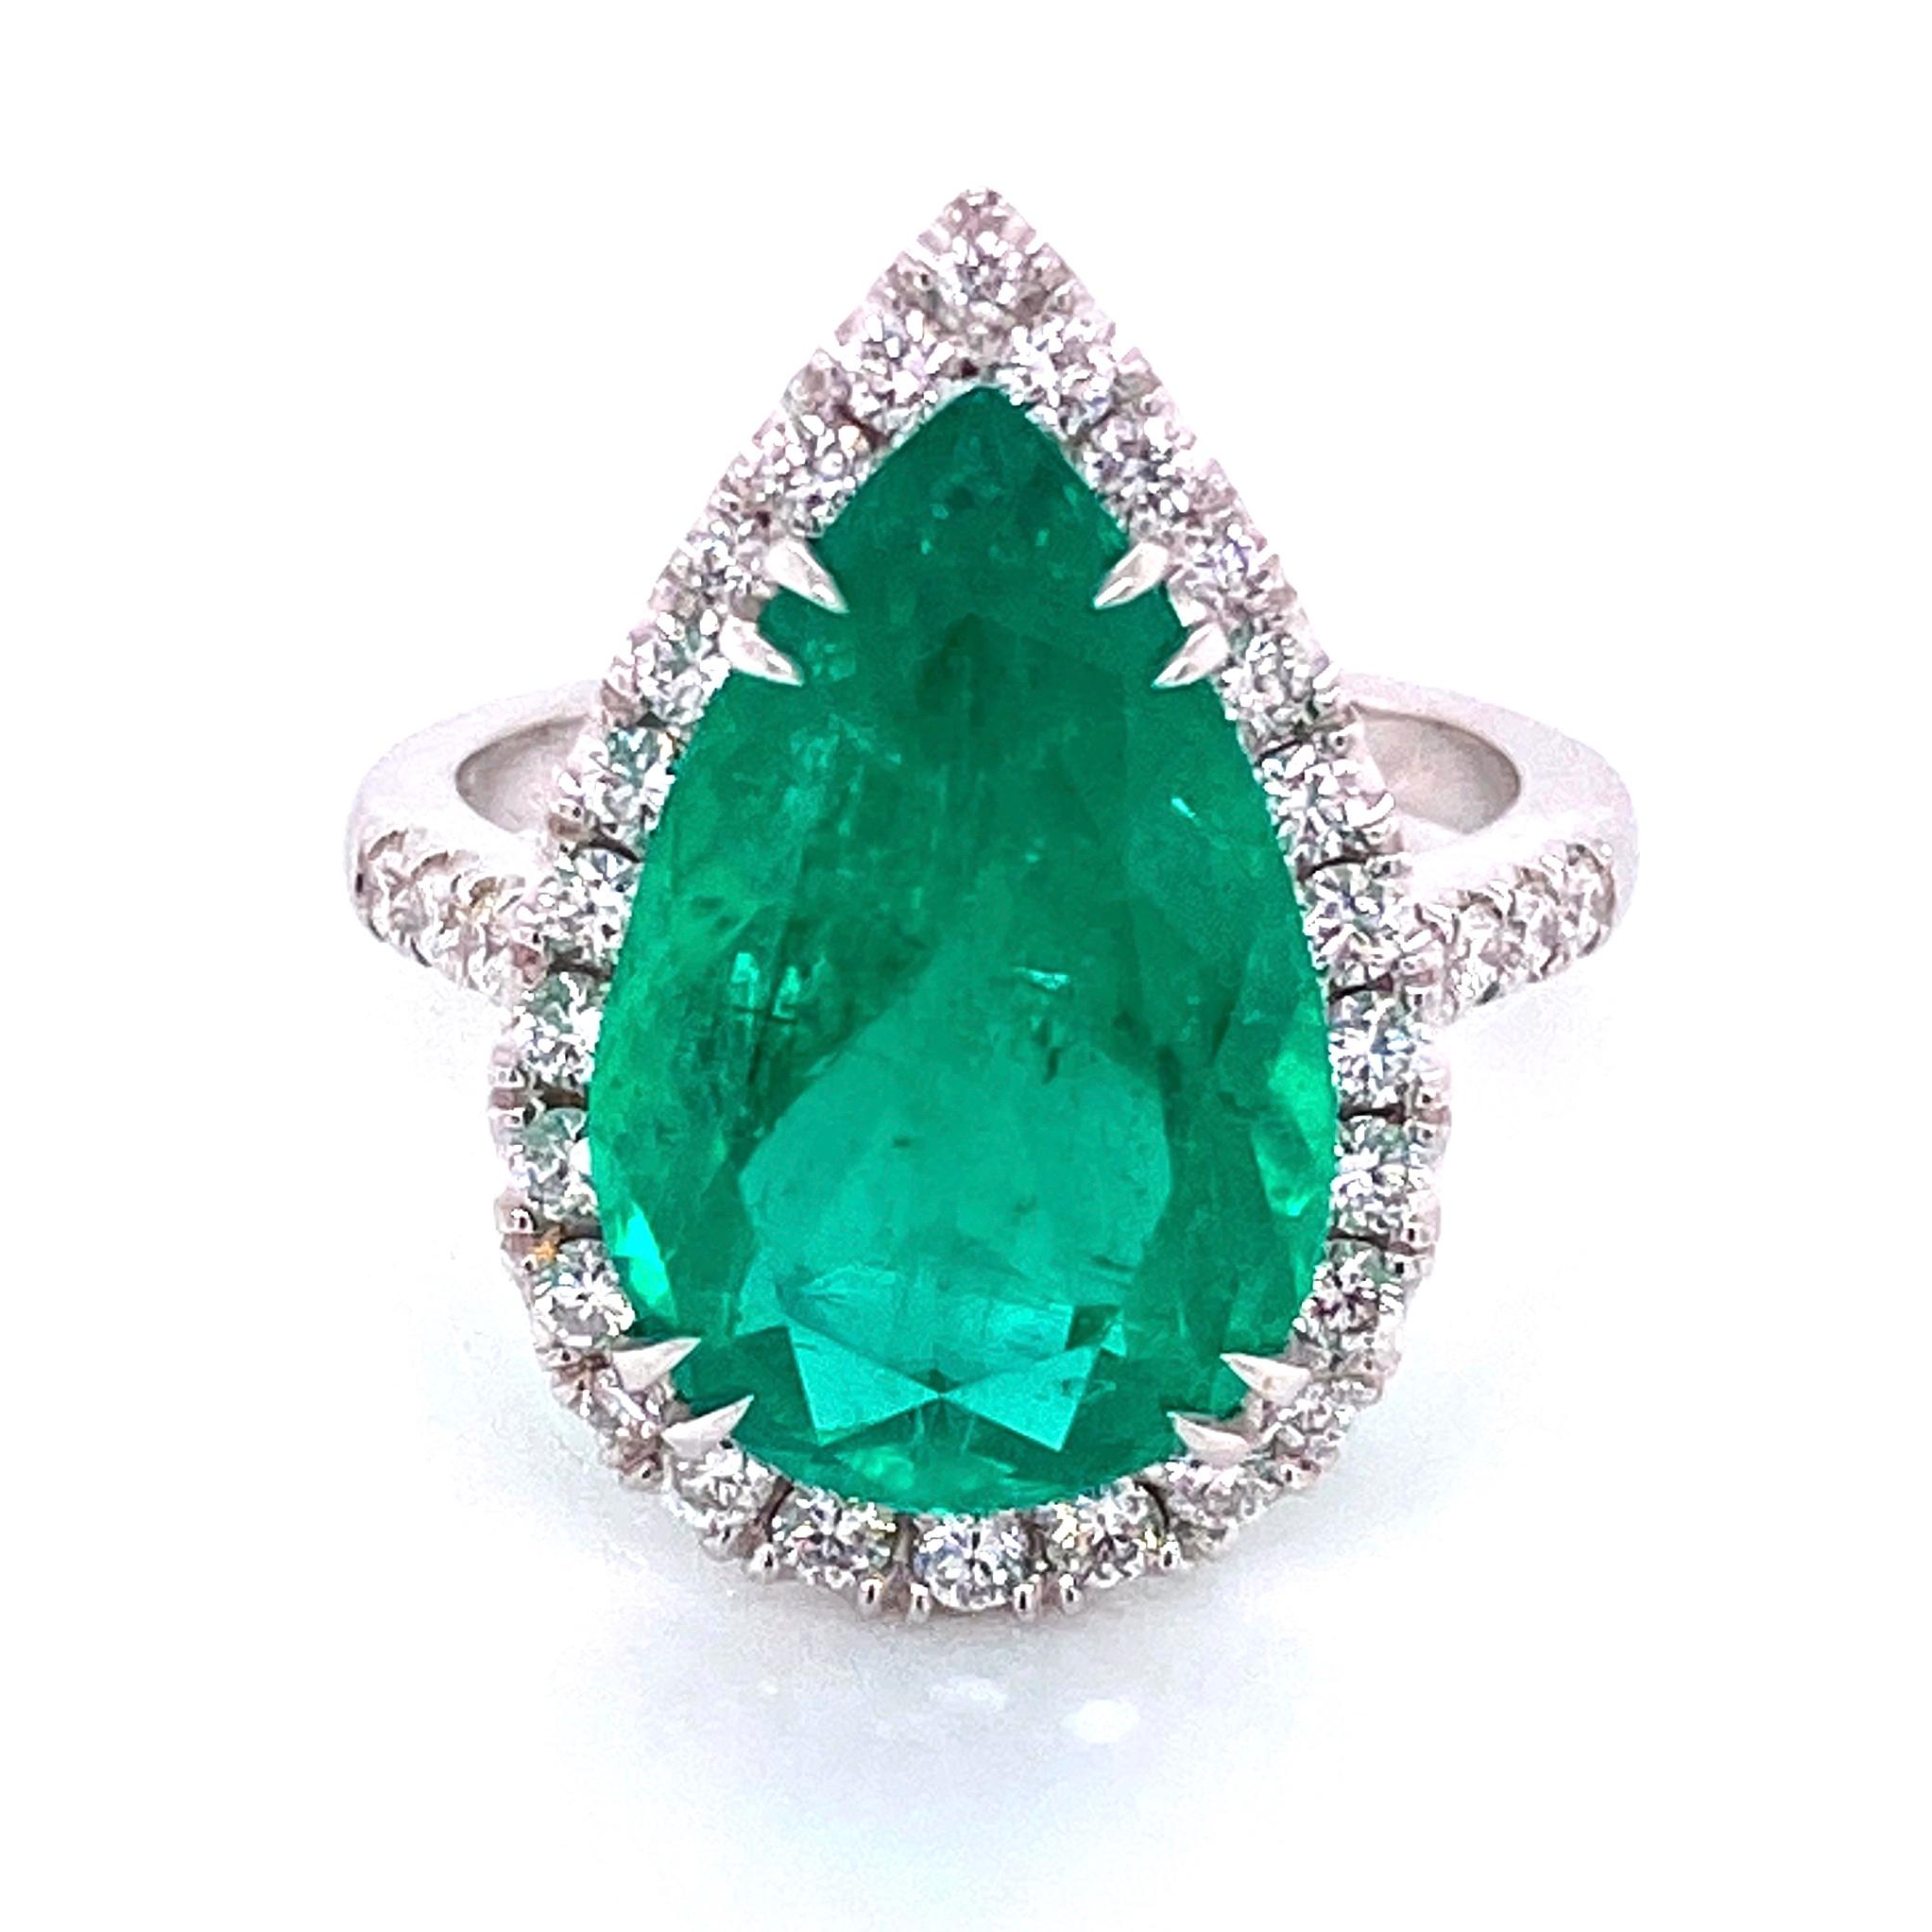 6.96 Carat Pear Shaped Emerald and Diamond Ring Estate Fine Jewelry For Sale 3